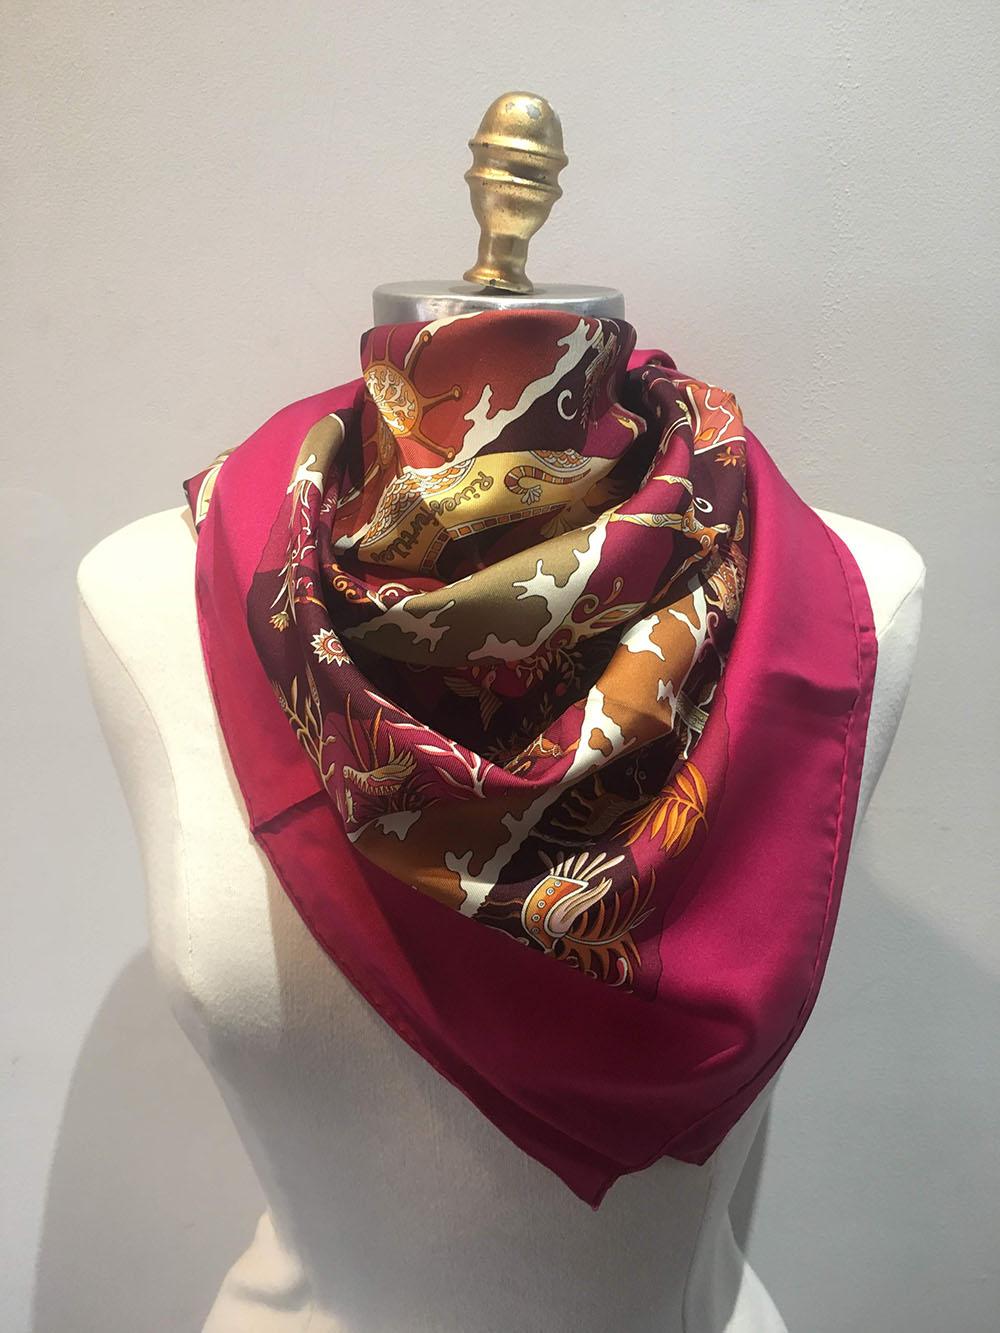 STUNNING Hermes Rives Fertiles Silk Scarf in Magenta in excellent condition.  Original silk screen design by Christine Henry c2005 features an arrangement of various real and mythological floral and fauna found along the fertile river bank of the